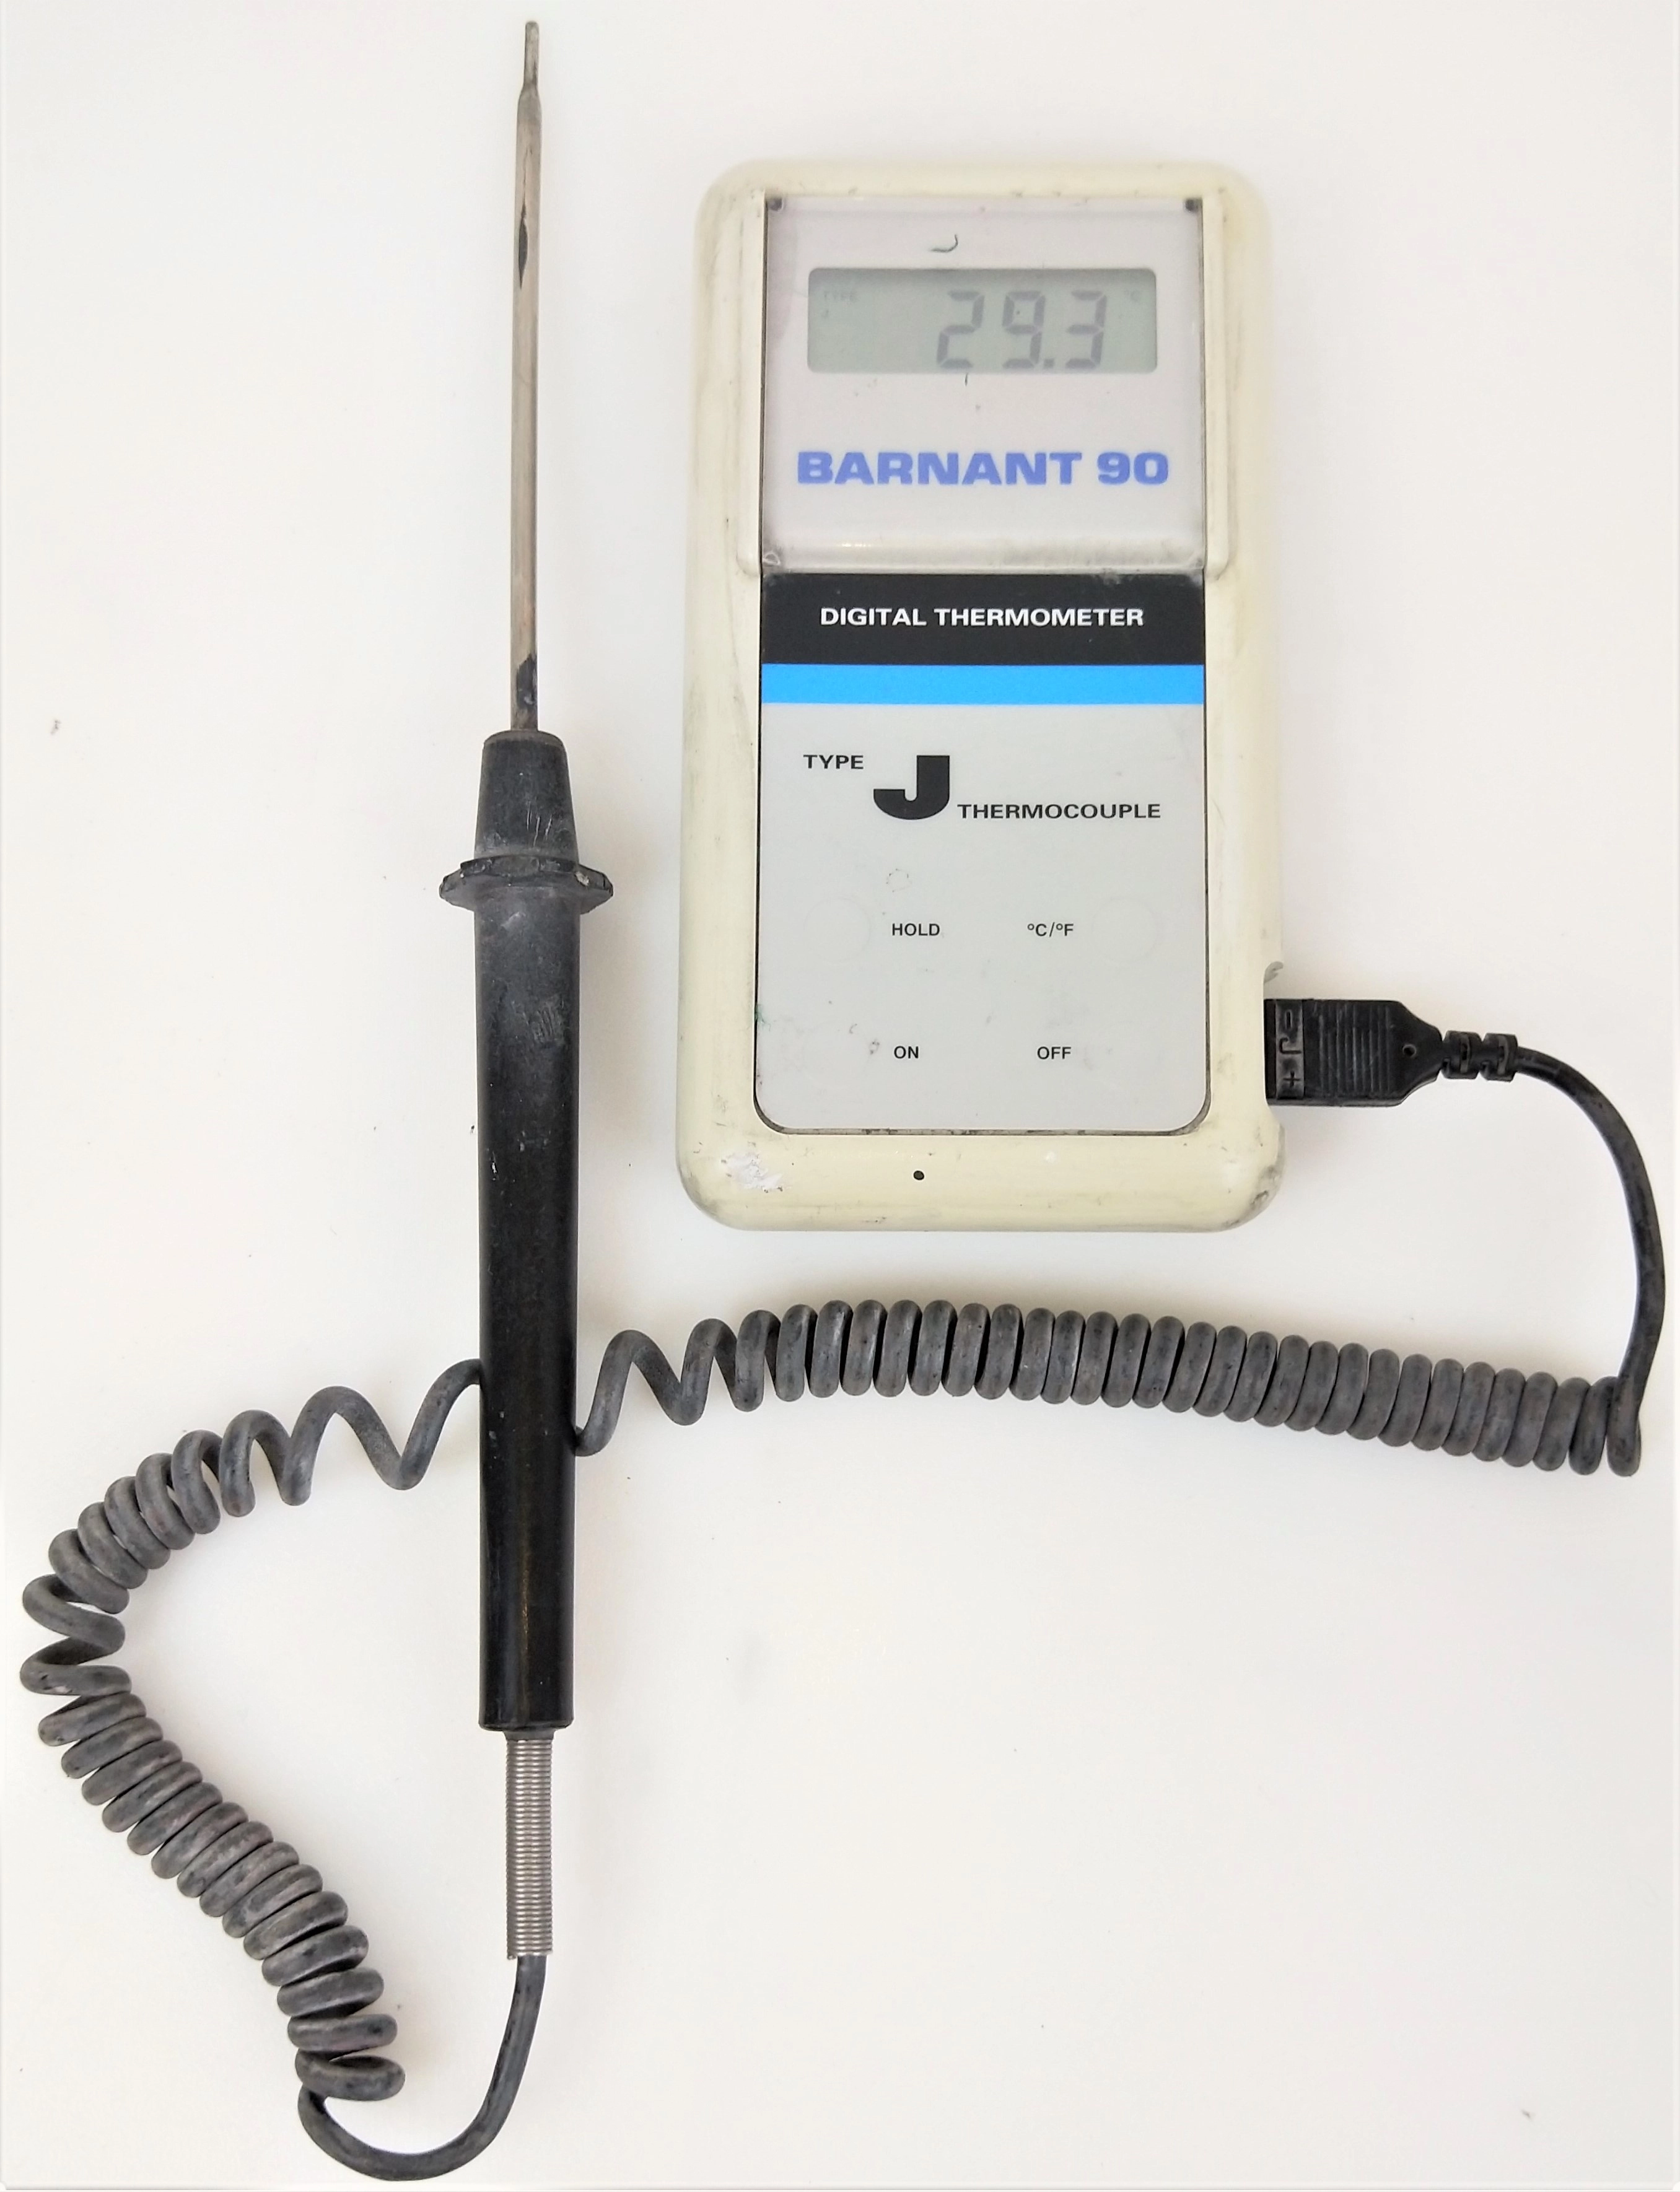 Barnant 90 Digital Thermometer with Type J Thermocouple